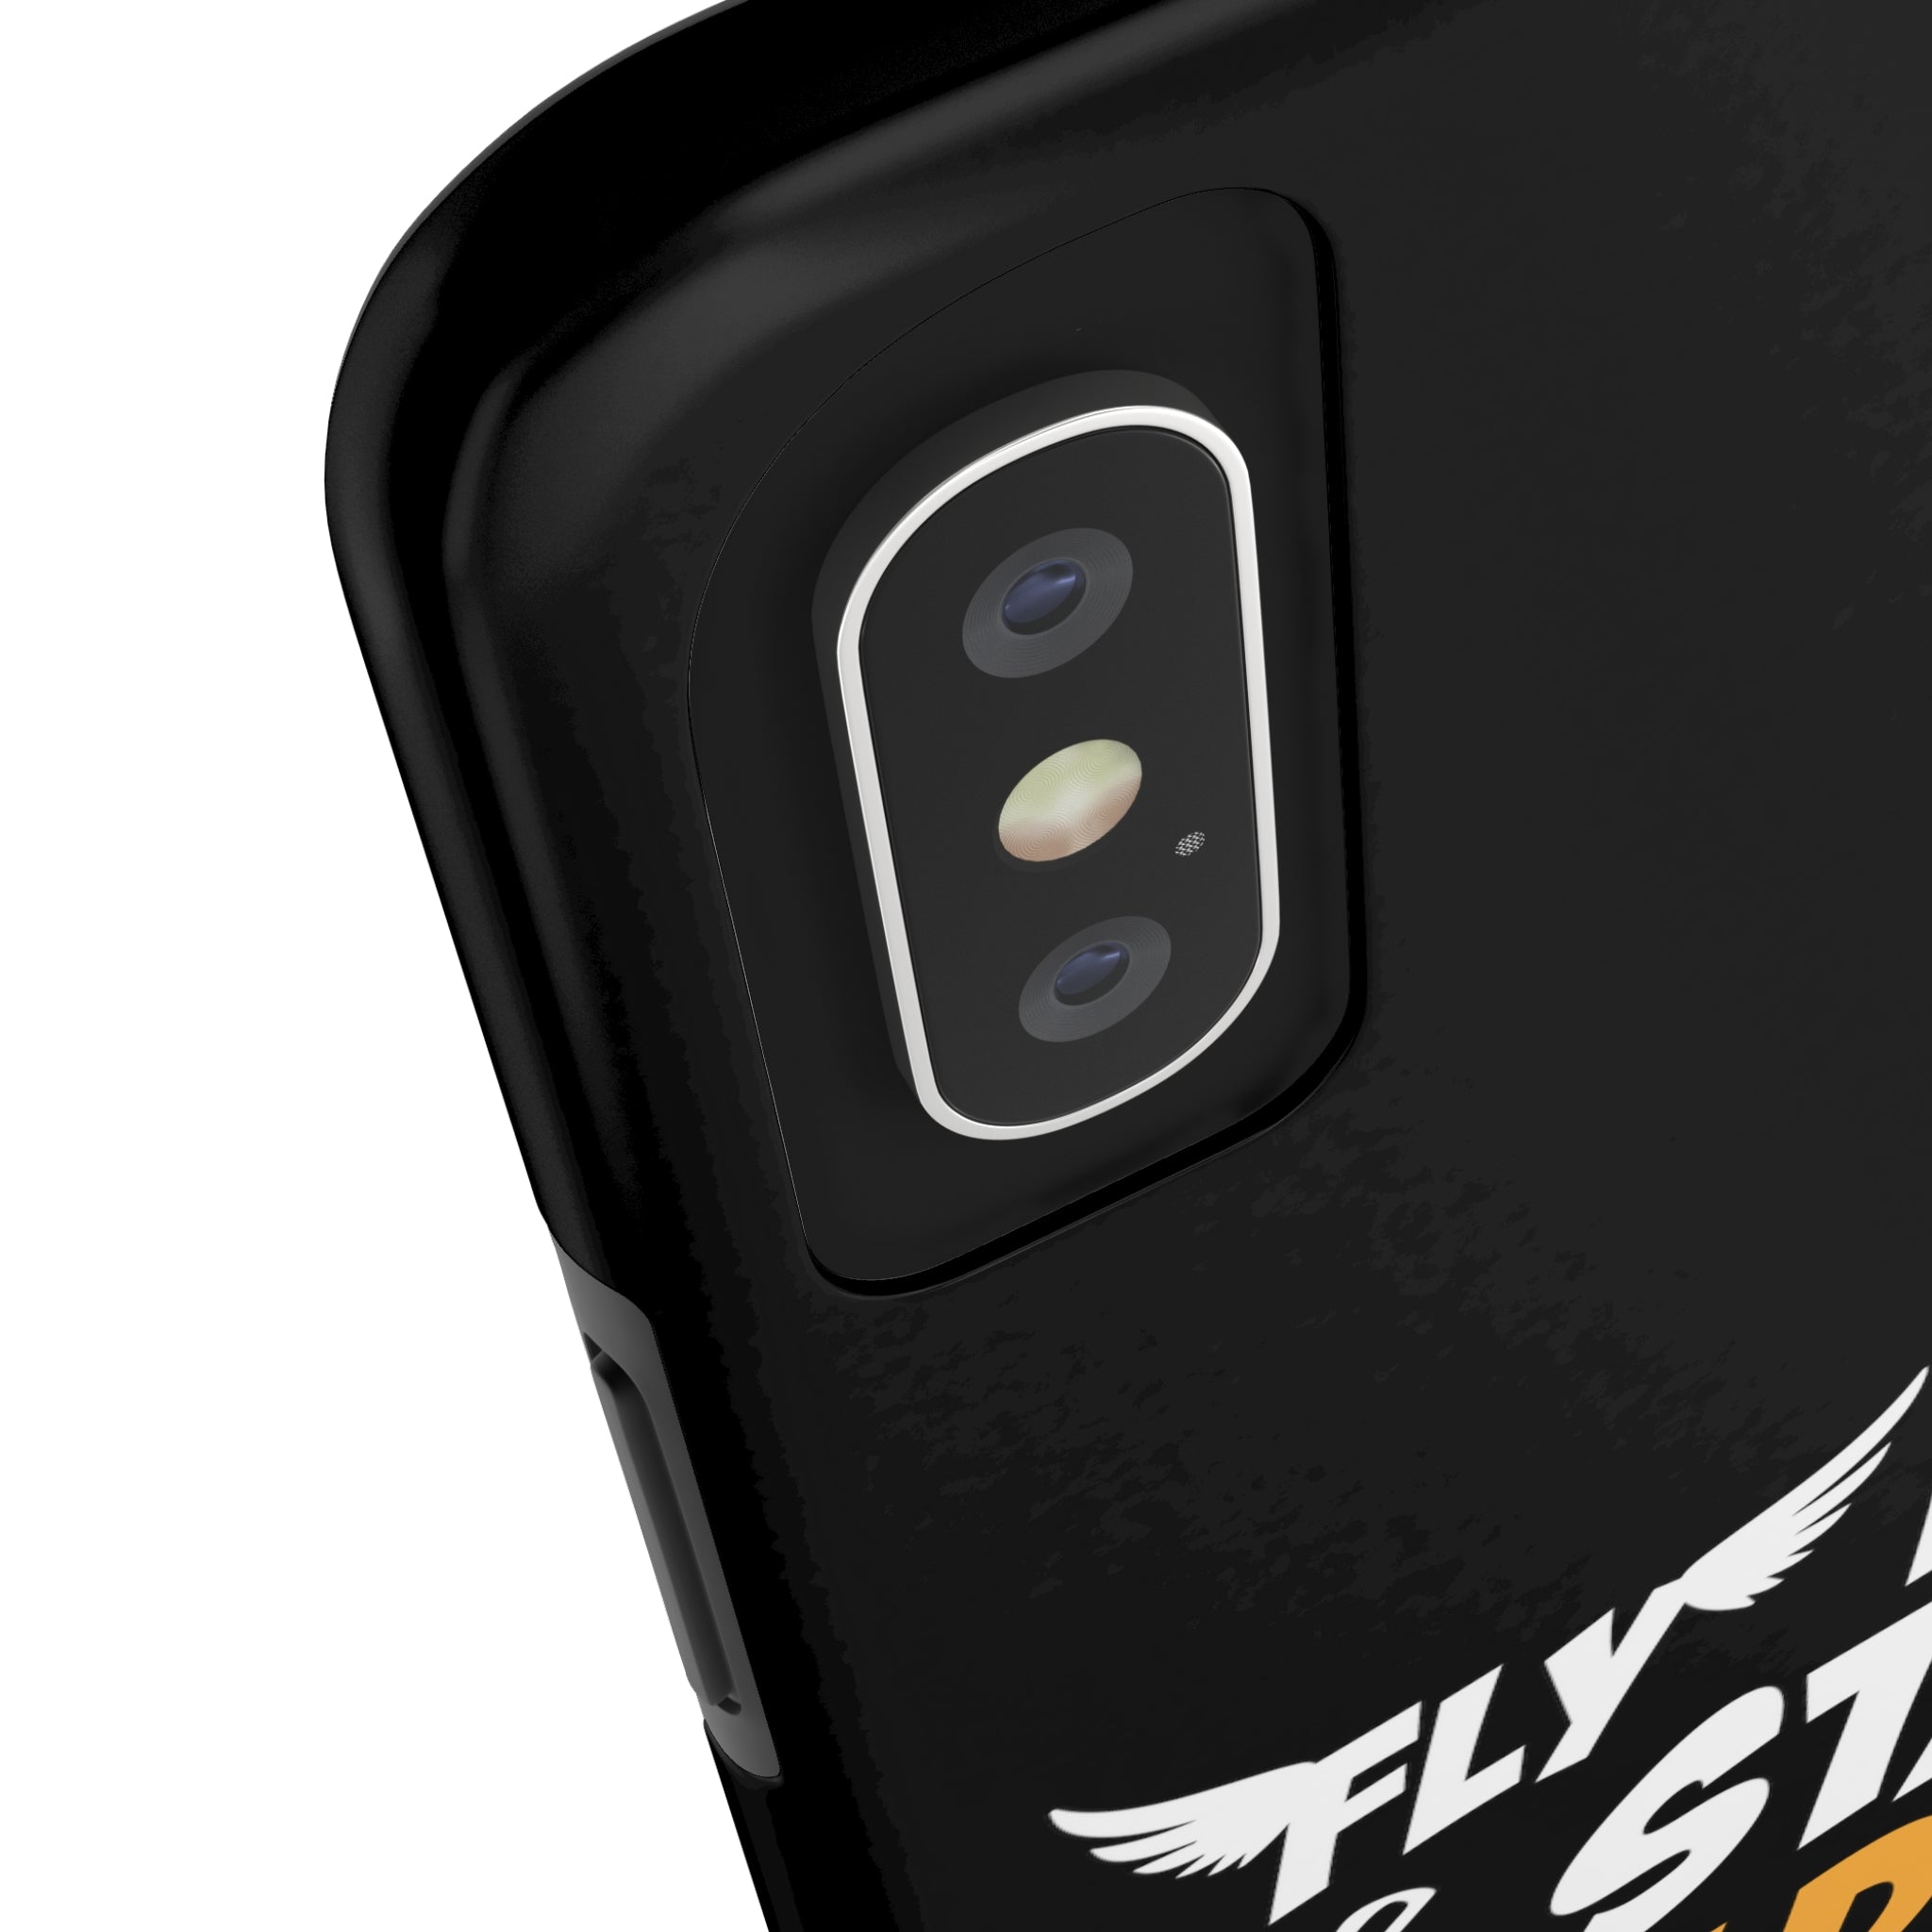 FLY WILD & STAY GOLD Tough Phone Cases